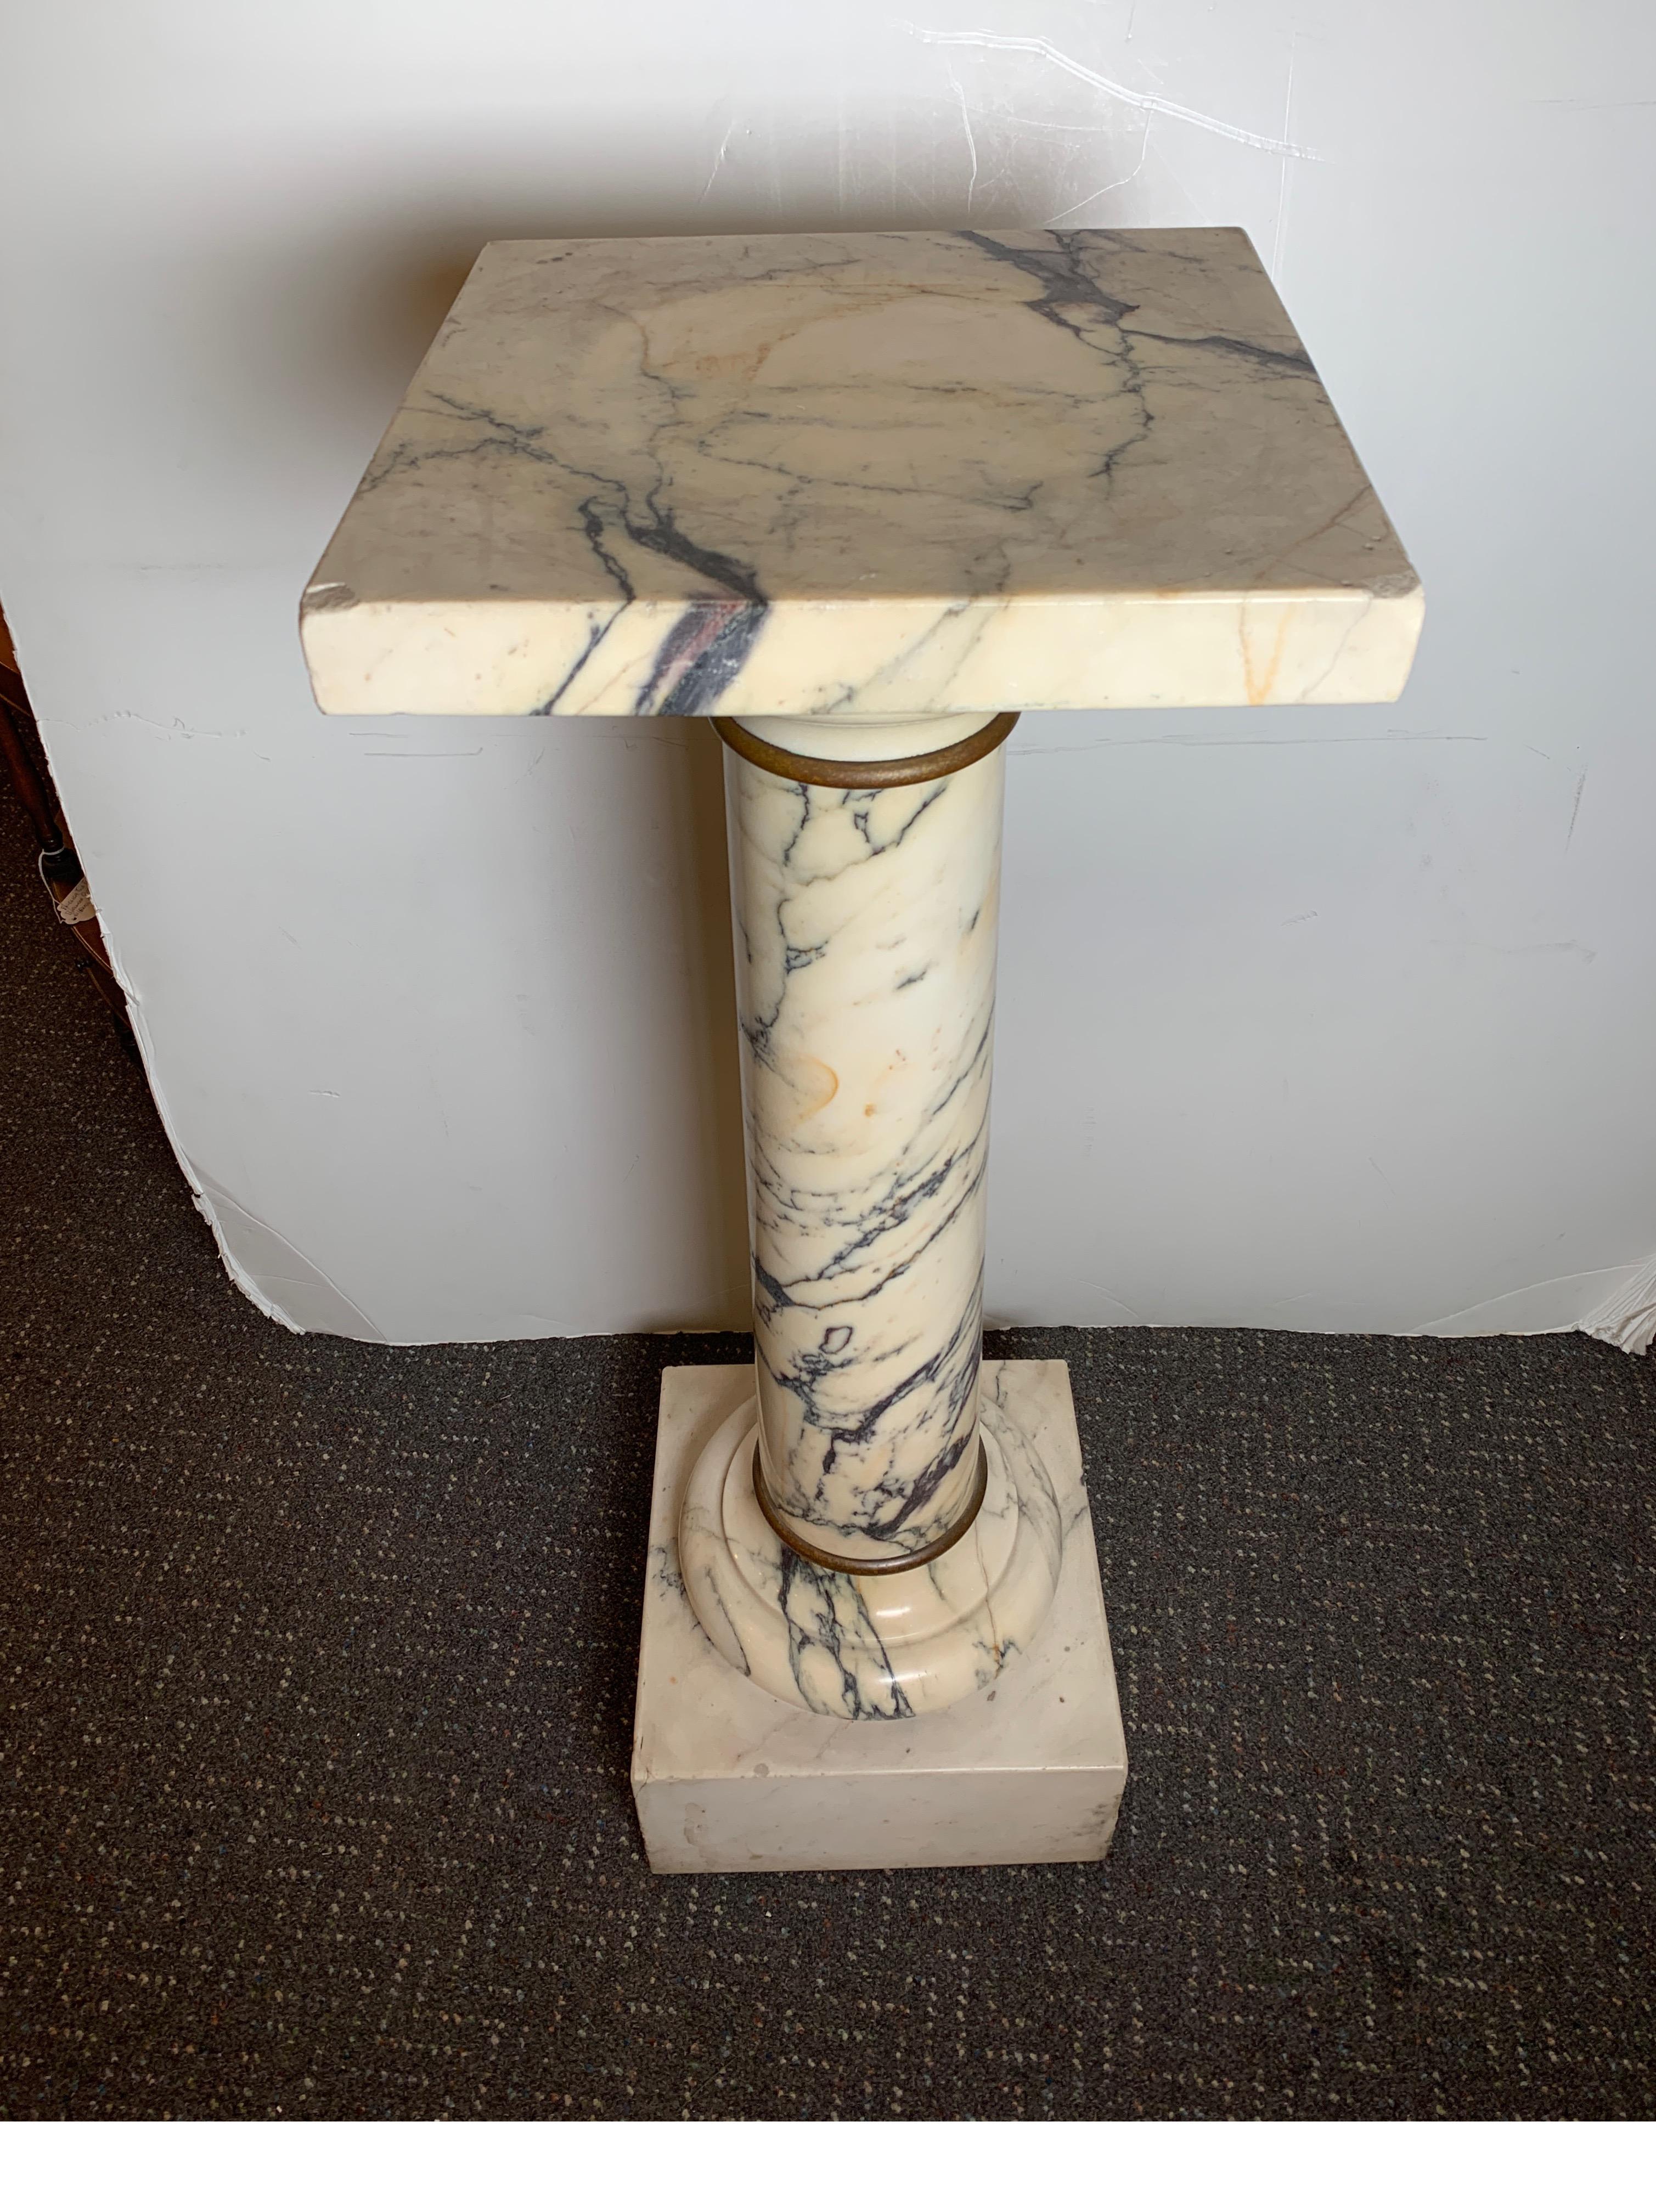 Traditional Italian marble pedestal with simple bronze ring accents, circa 1890s.
Nice size and weight to accommodate heavy sculptures
Dimensions: 37